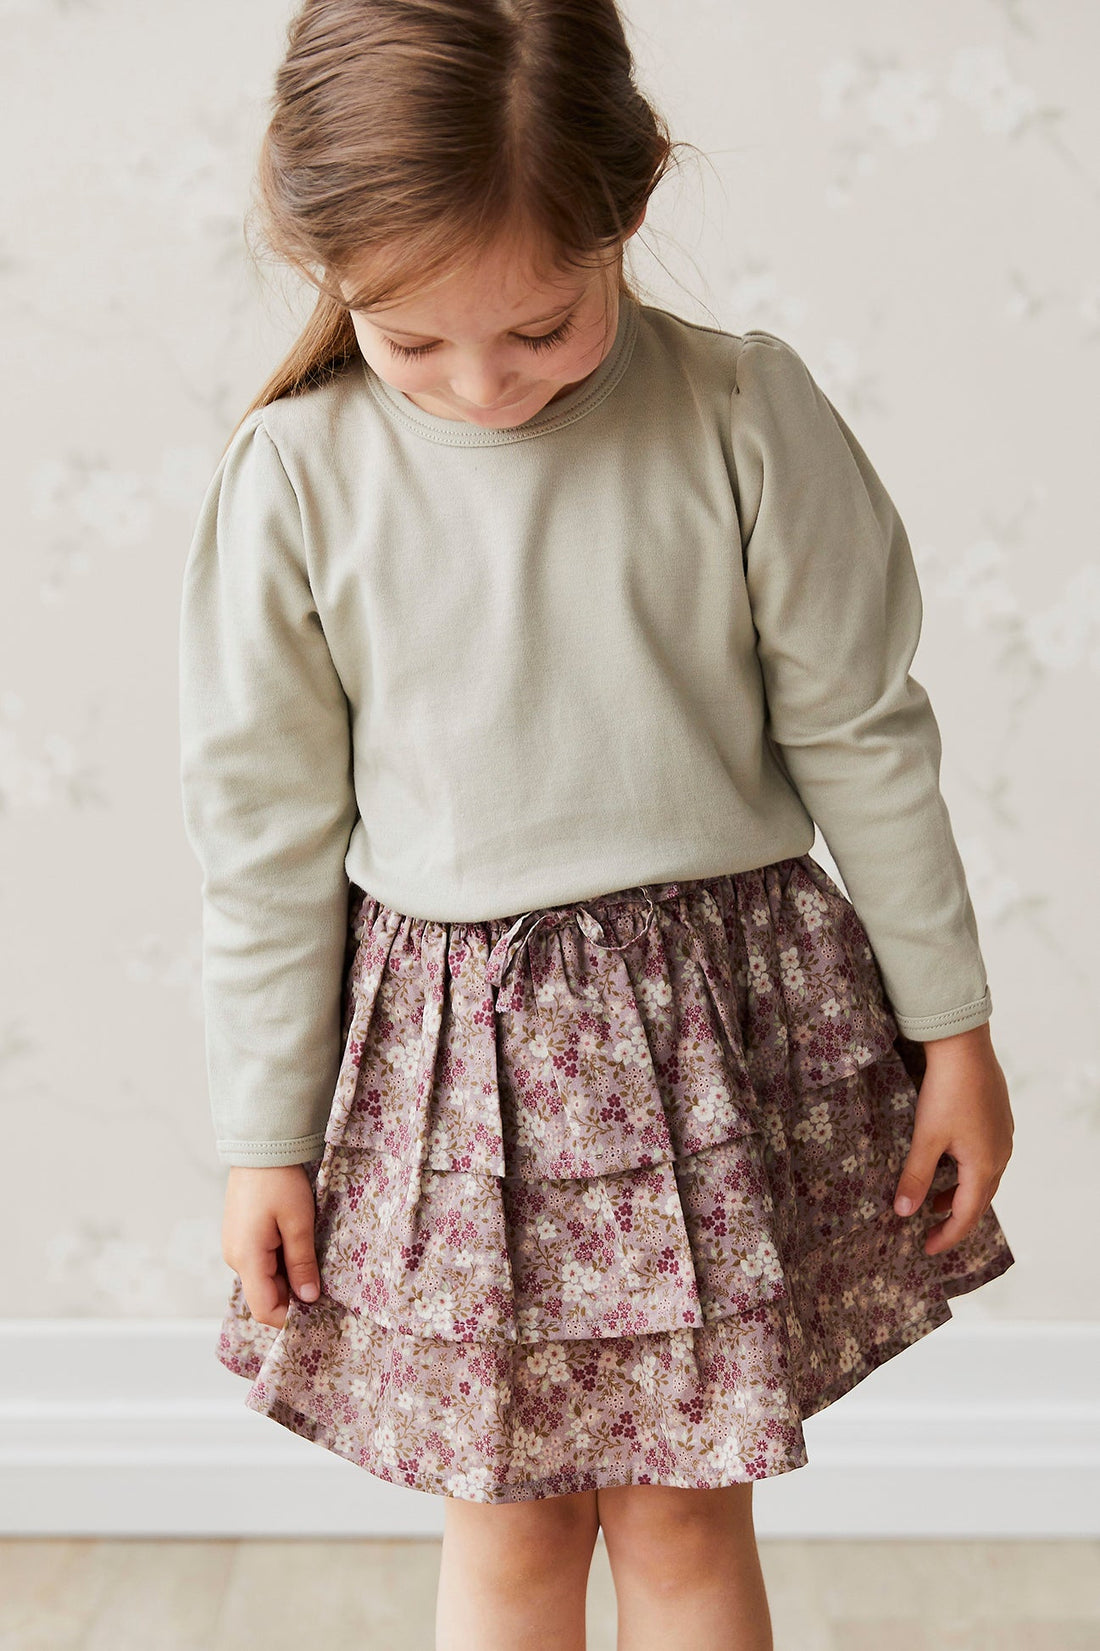 Organic Cotton Abbie Skirt - Pansy Floral Fawn Childrens Skirt from Jamie Kay USA